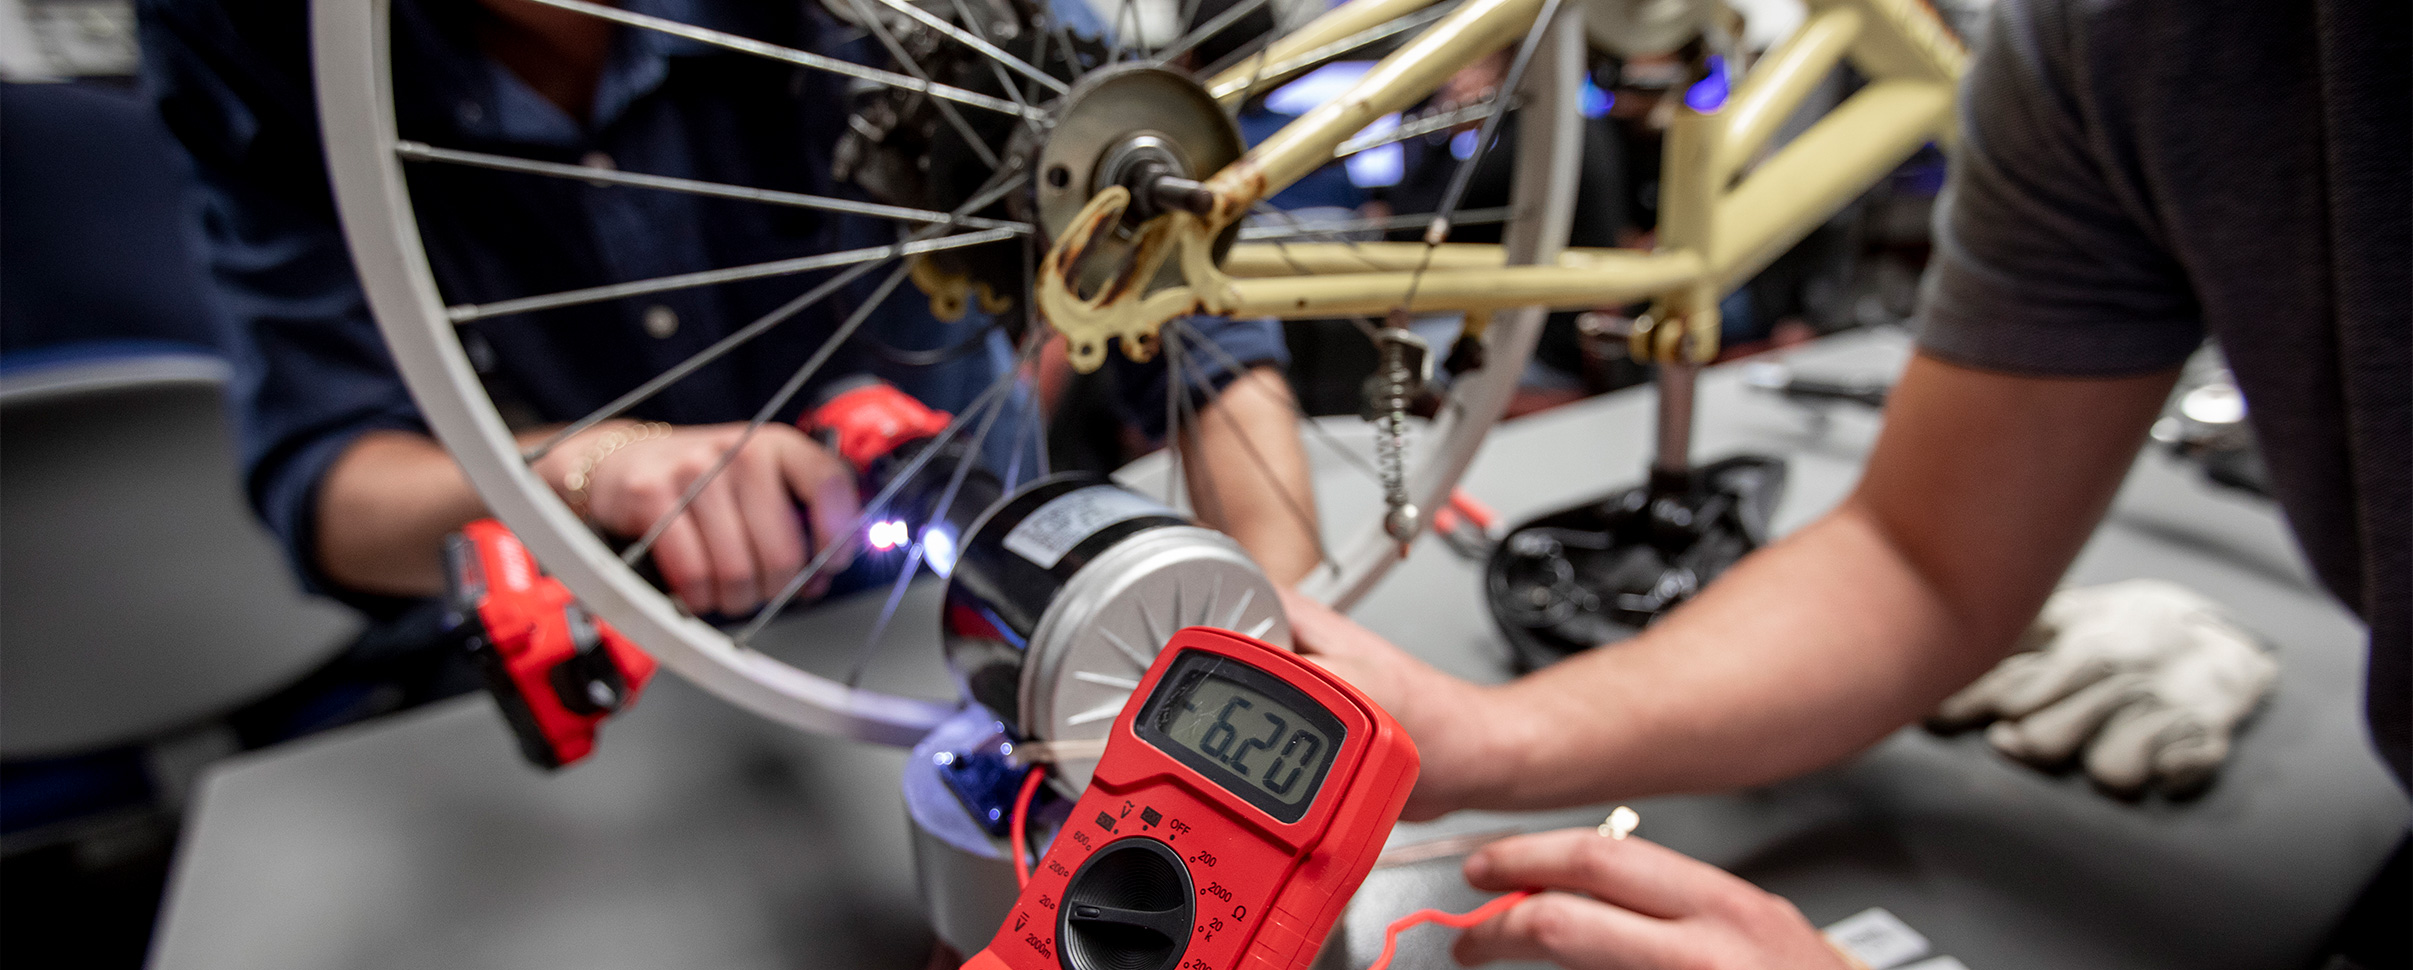 students working on electric motor for bicycle